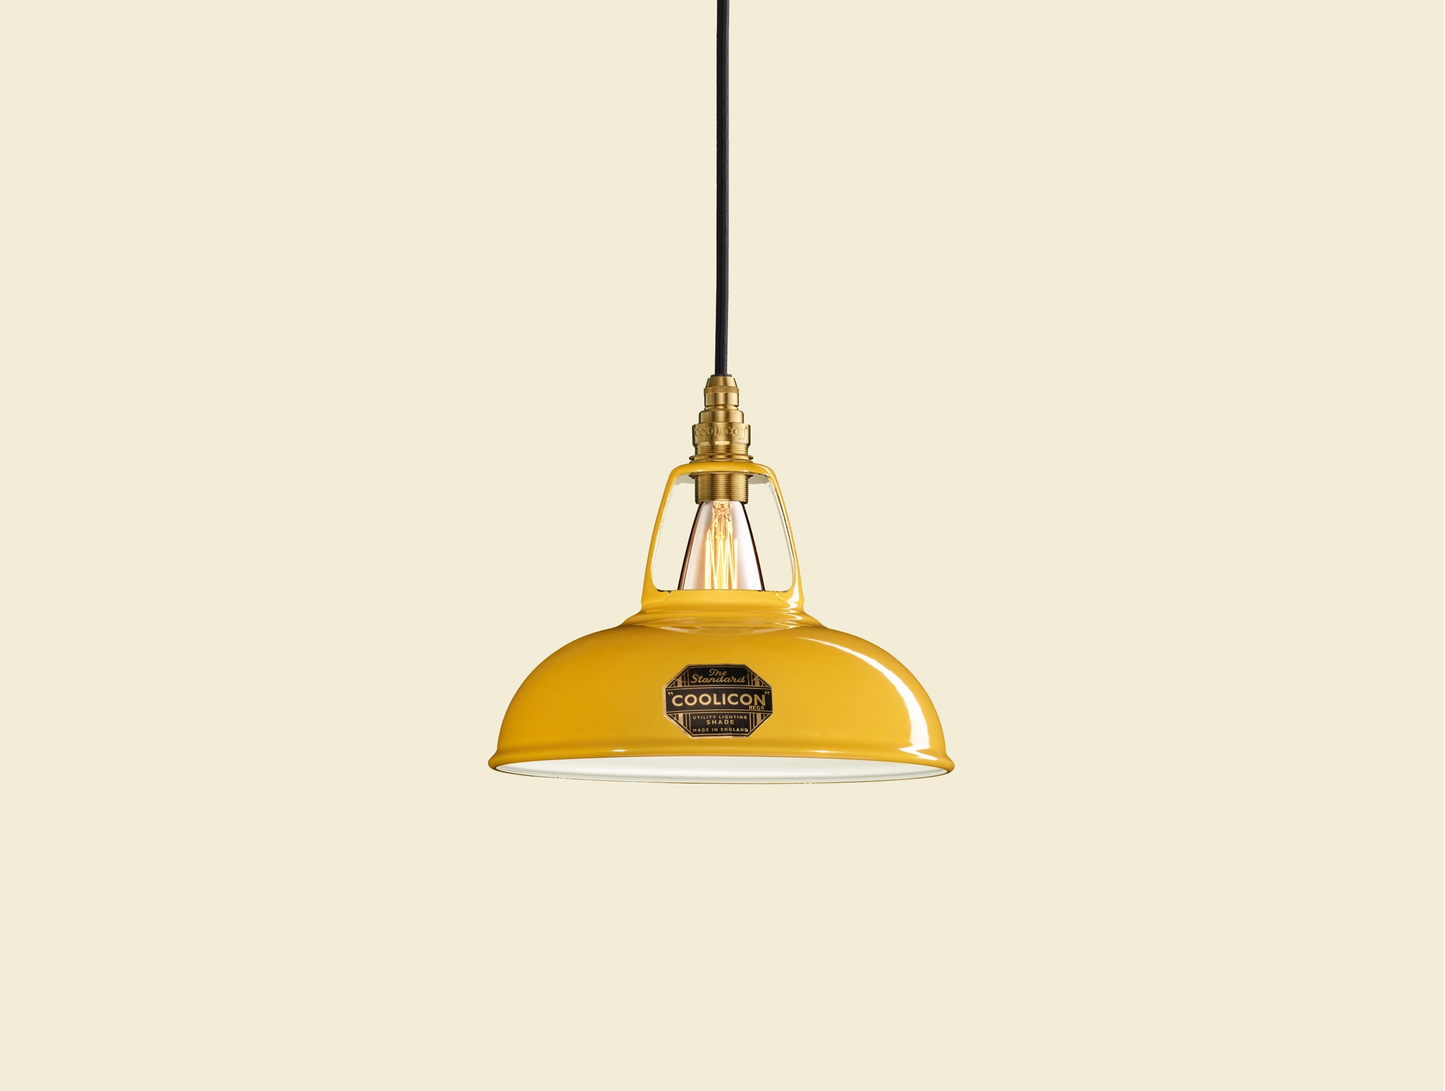 Deep Yellow Coolicon lampshade with a Brass pendant set over a yellow background